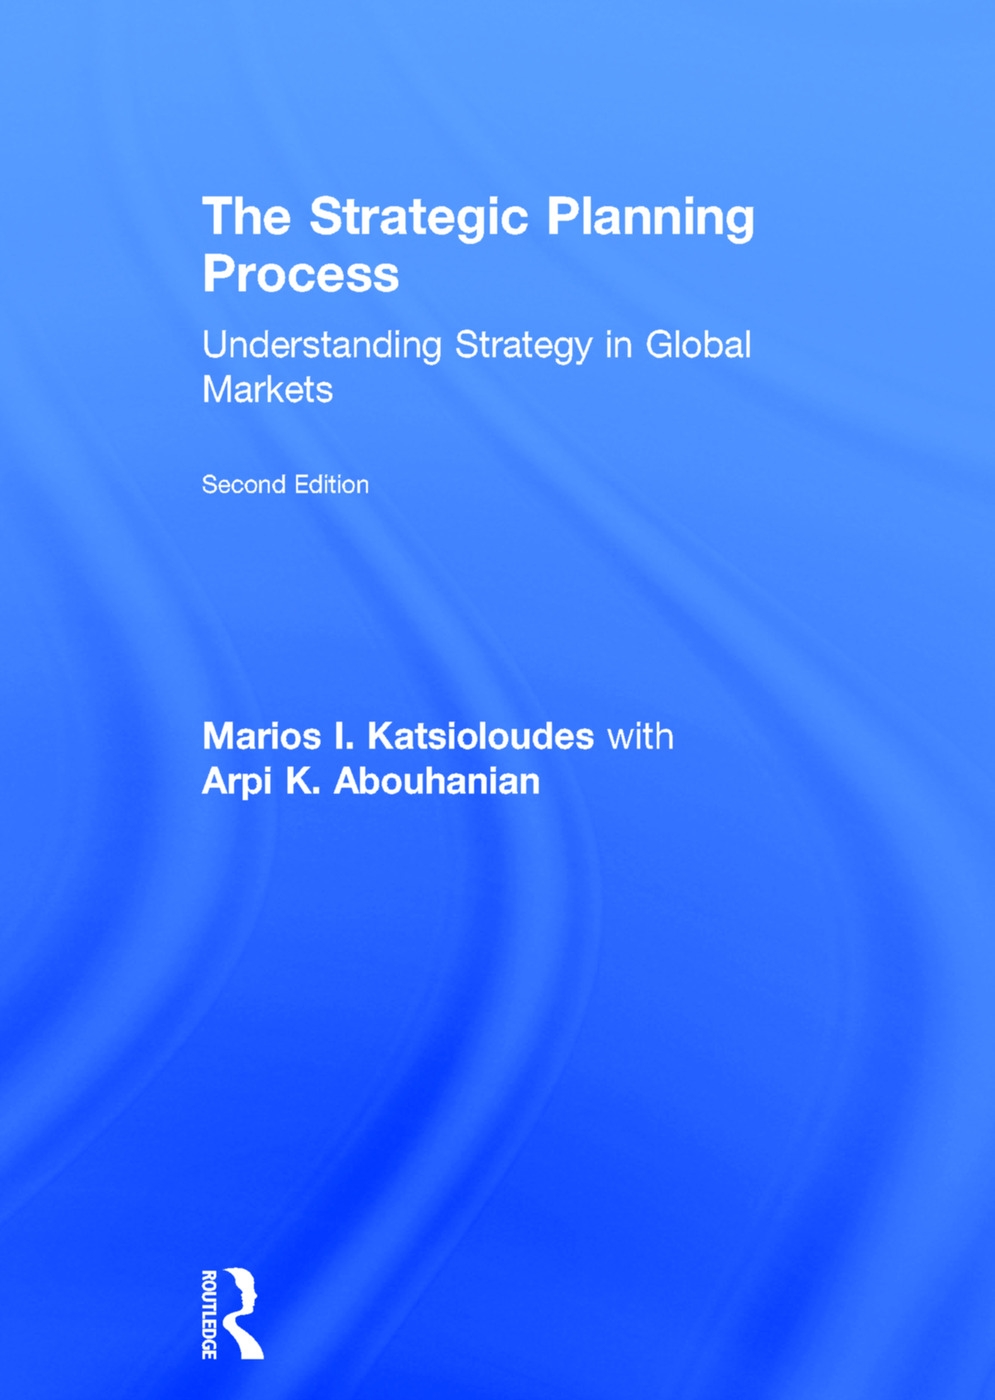 The Strategic Planning Process: Understanding Strategy in Global Markets